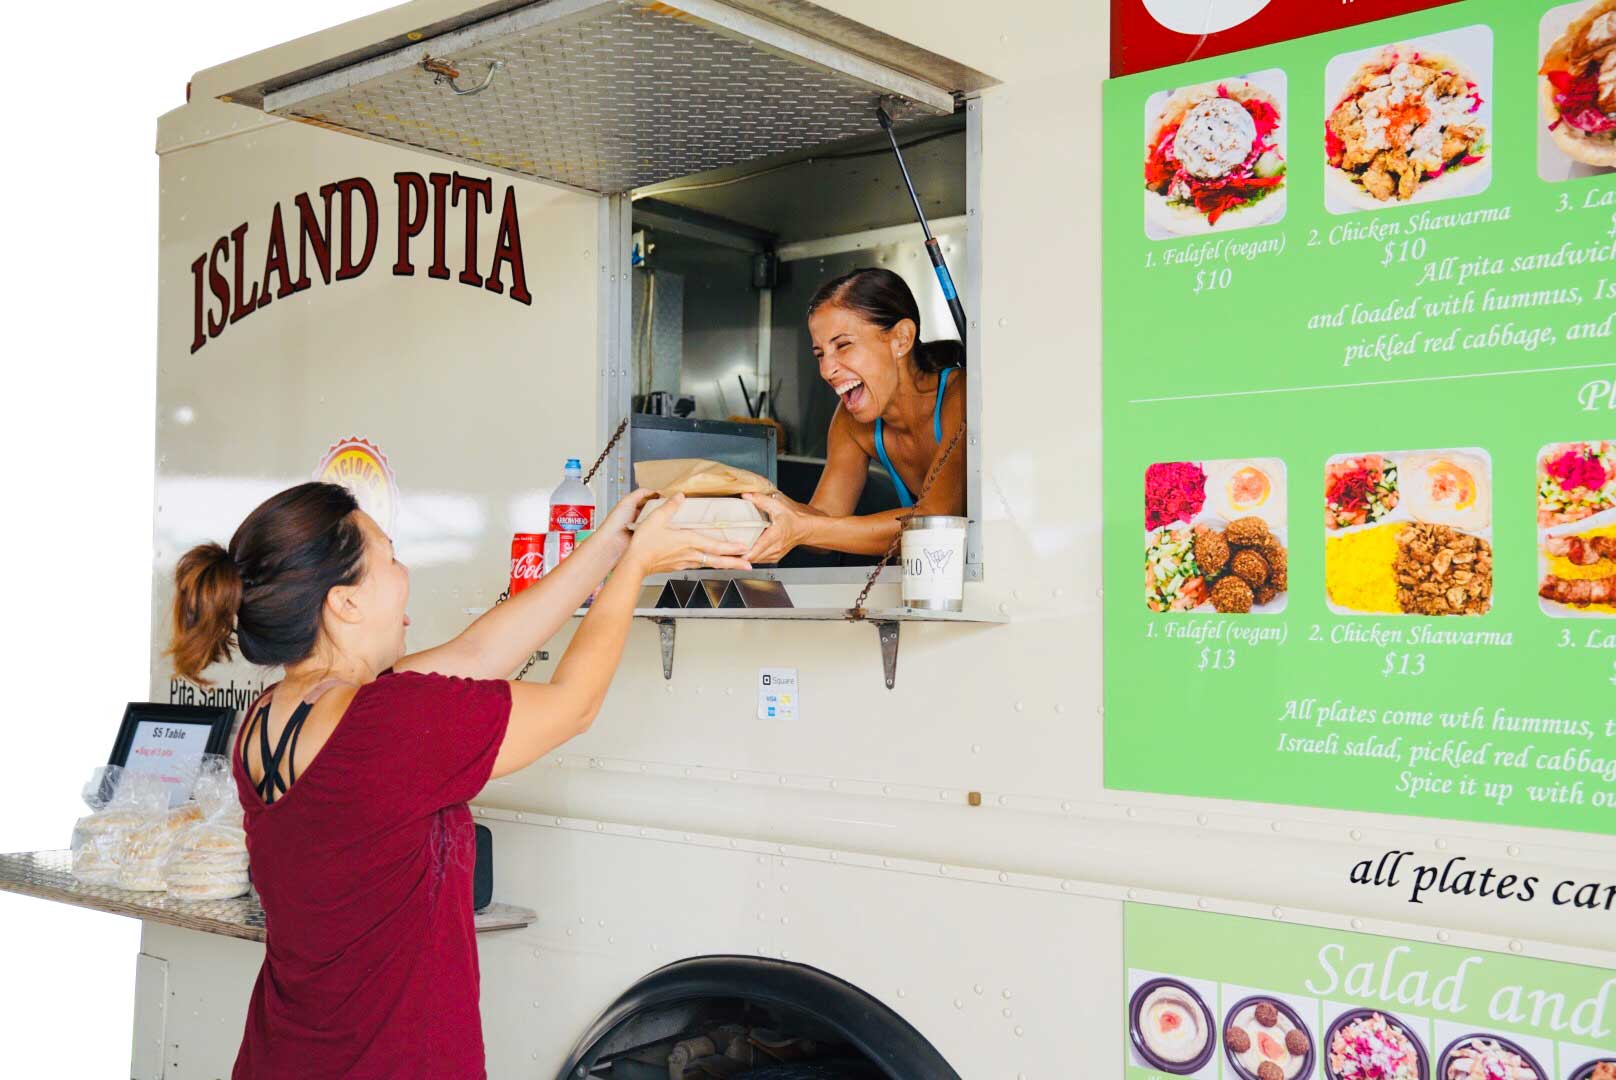 A customer picks up an order of food from the Island Pita food truck